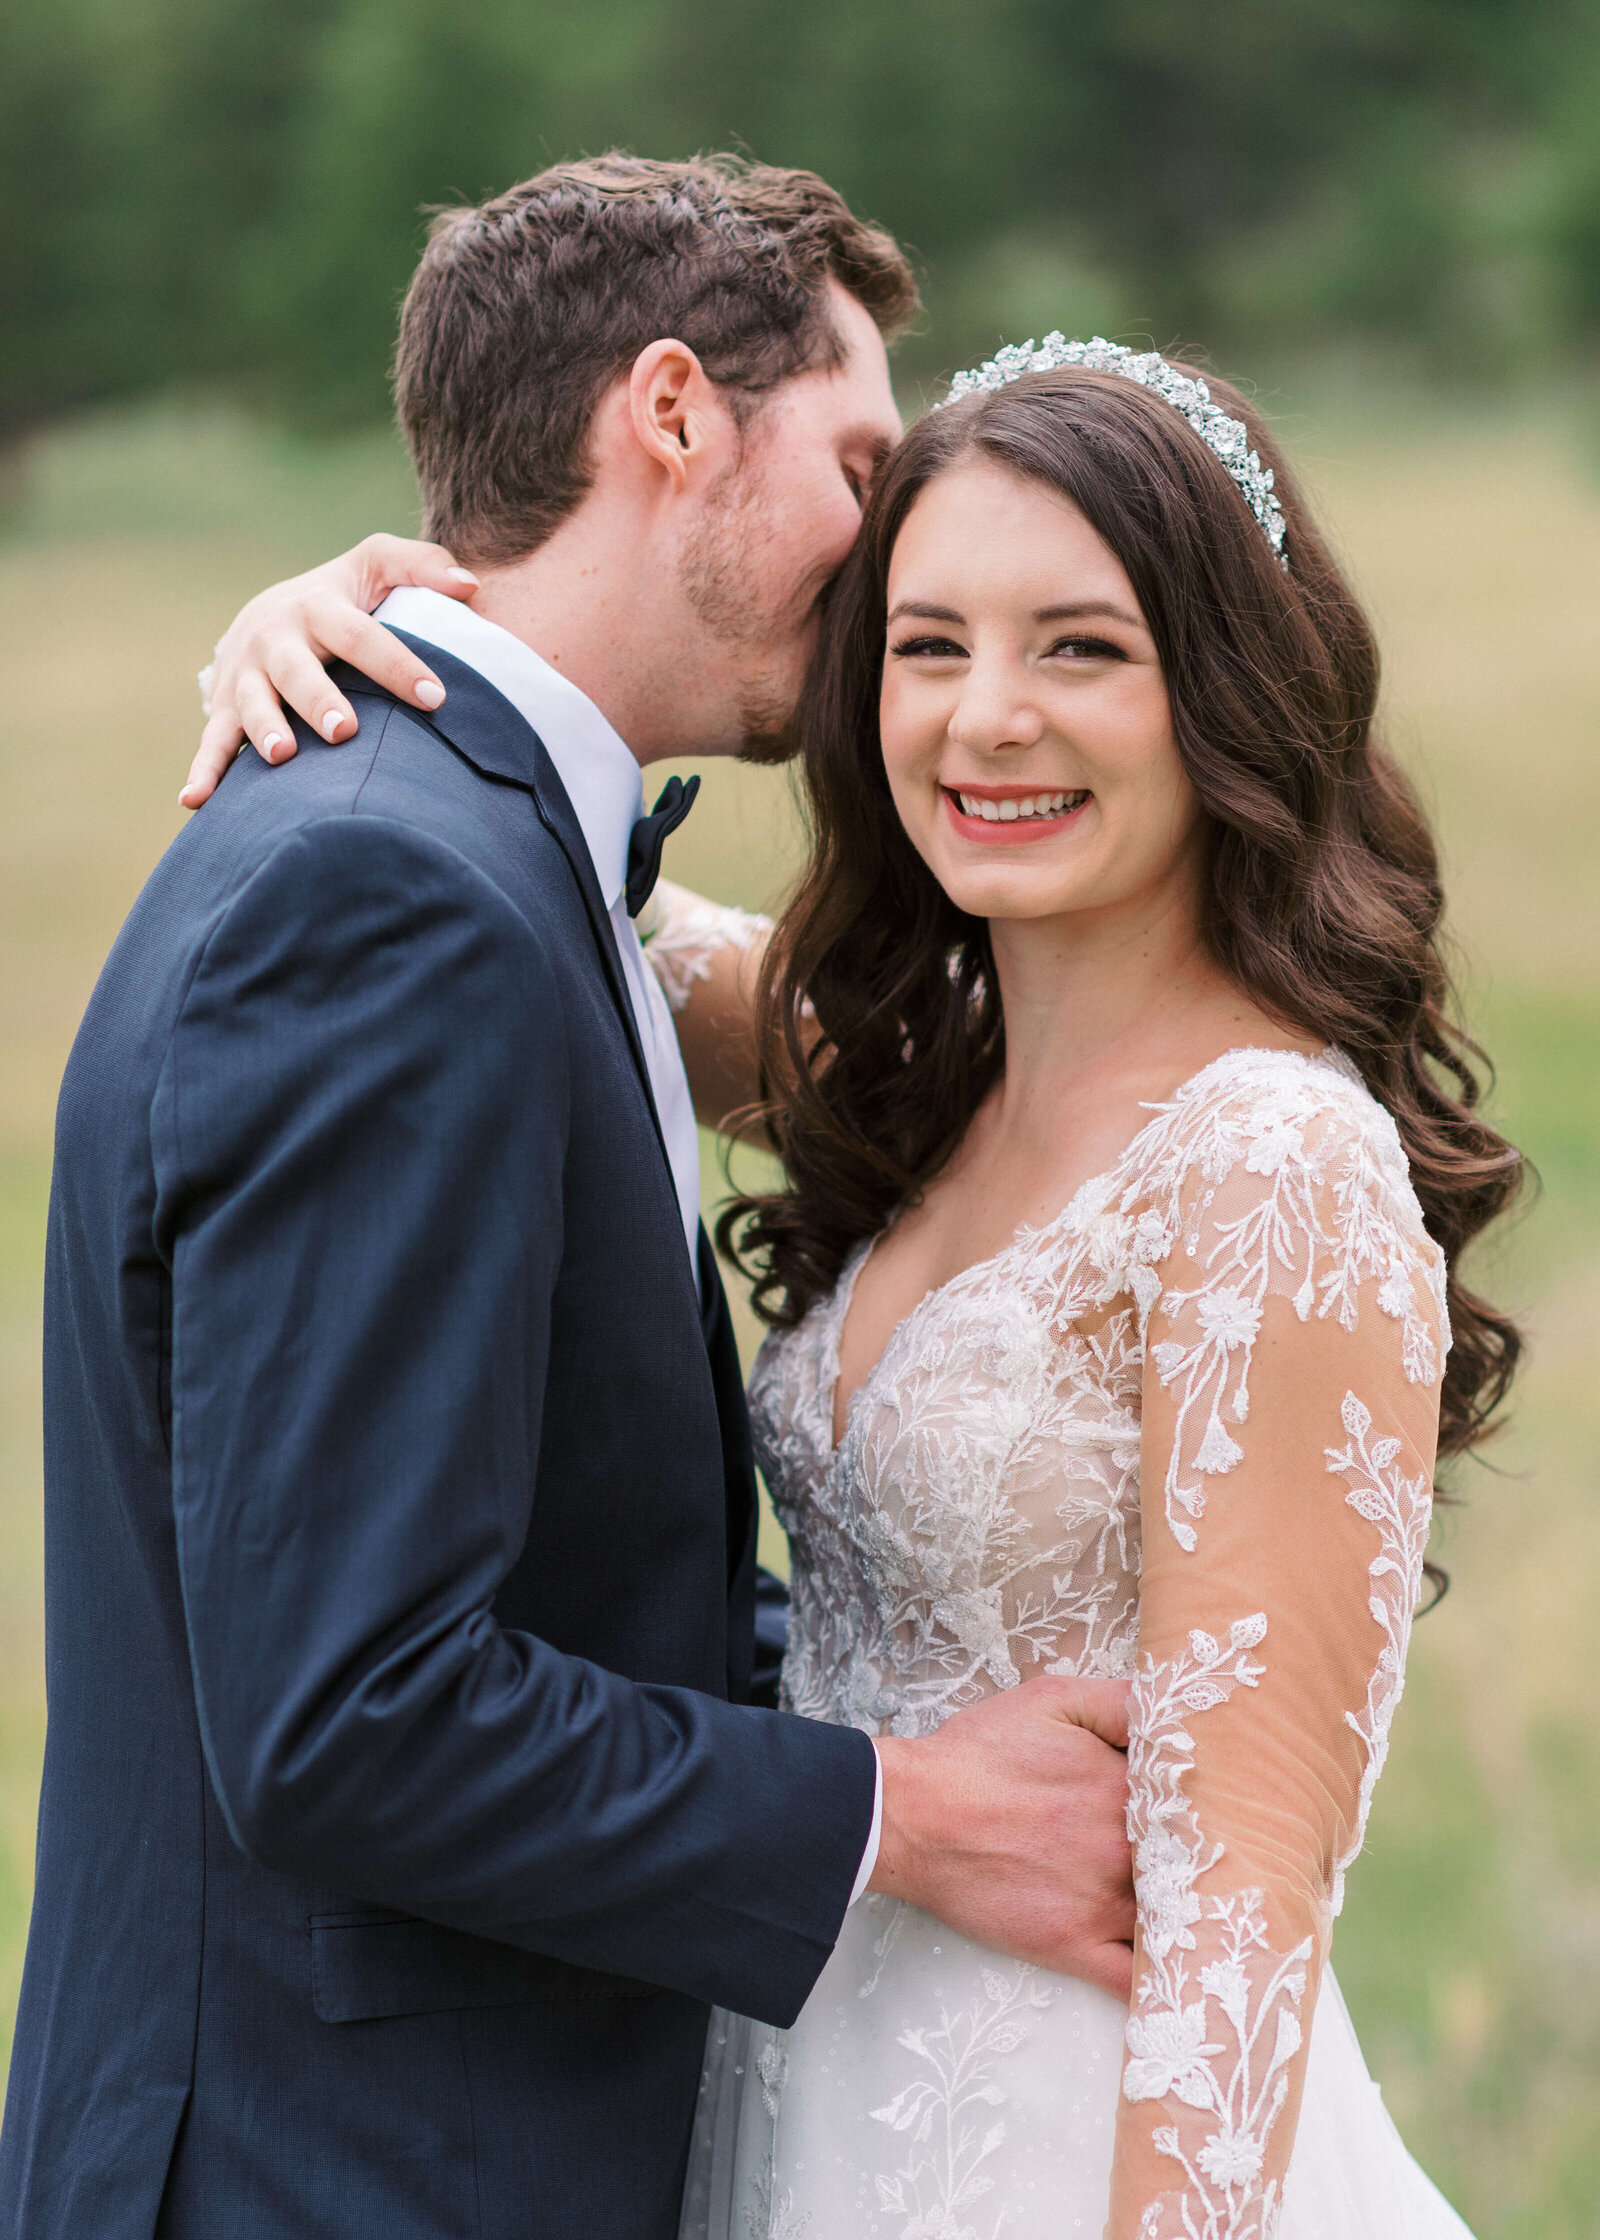 Virginia wedding photographer takes picture of a groom kissing his new bride on the cheek while she smiles at the camera